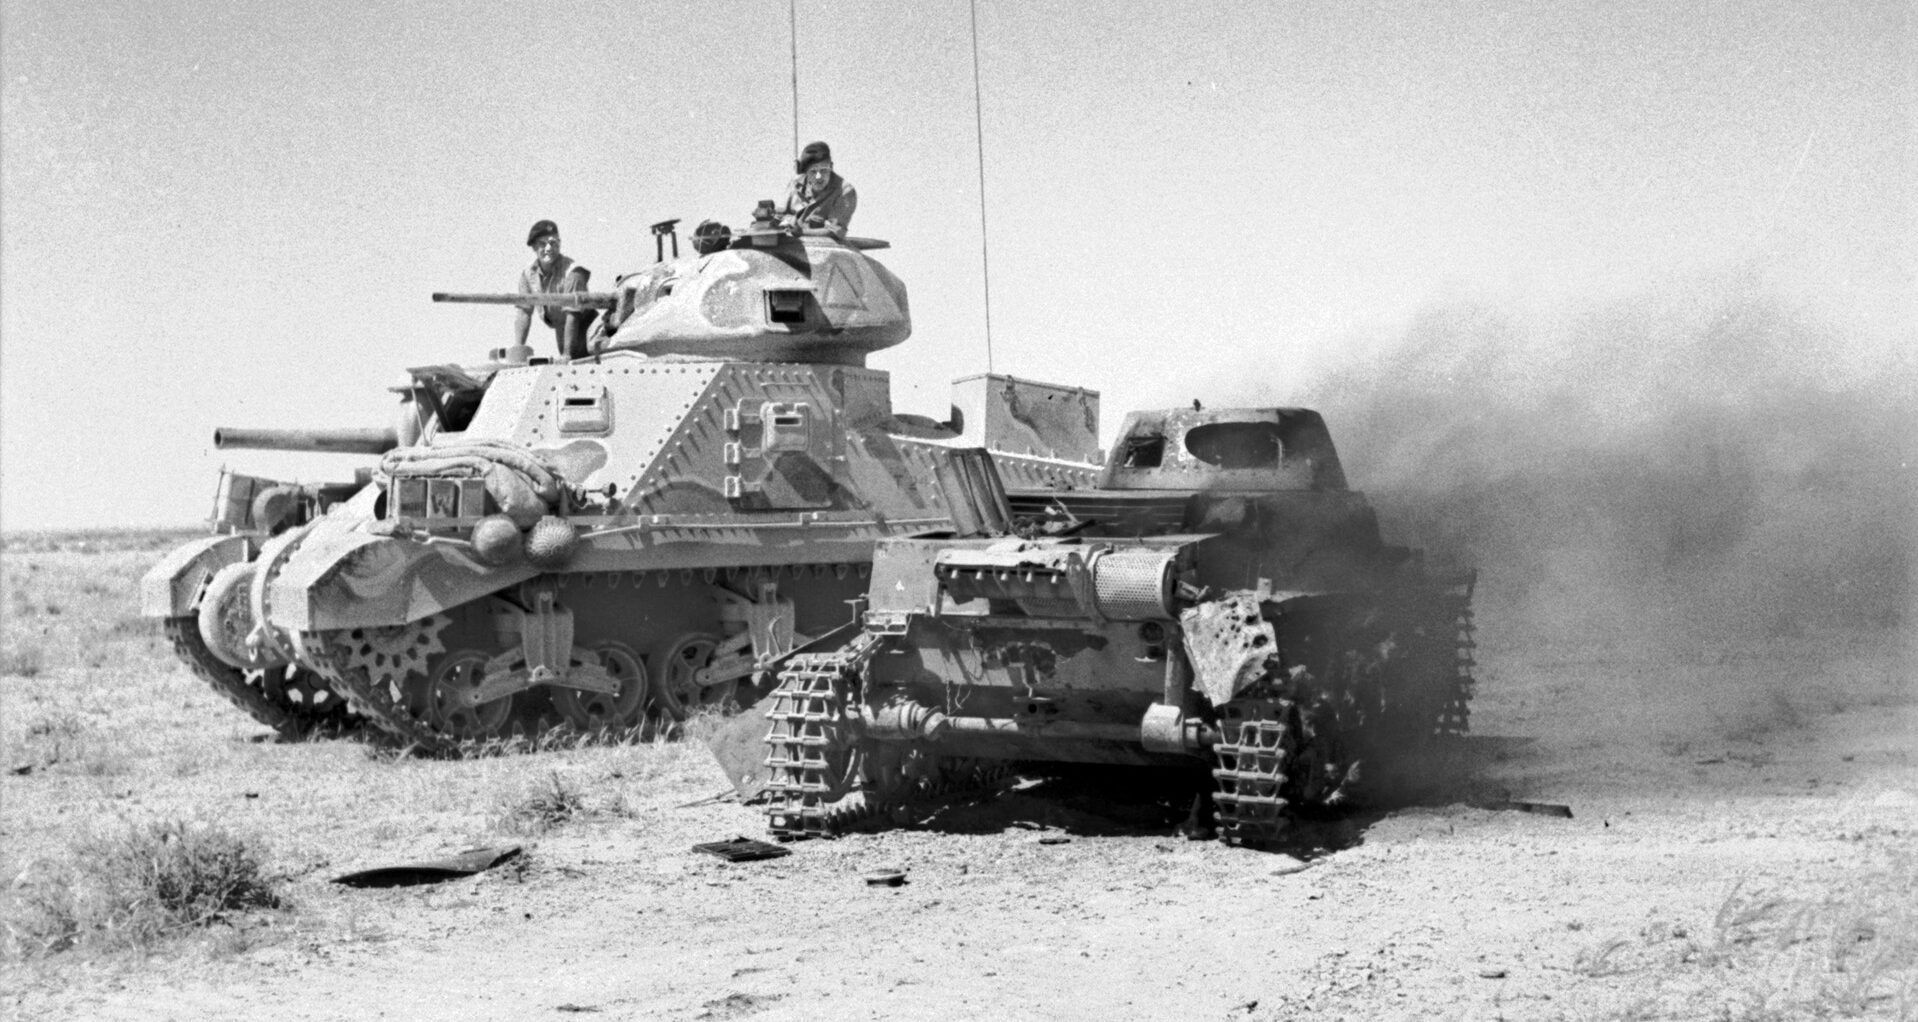 In this image, a German vehicle has come to grief. An American-built M3 Grant tank passes the blasted hulk of an Axis tank as its British crew surveys the wreckage. The Germans were reportedly surprised by the appearance of the Grant on the battlefield at Gazala.